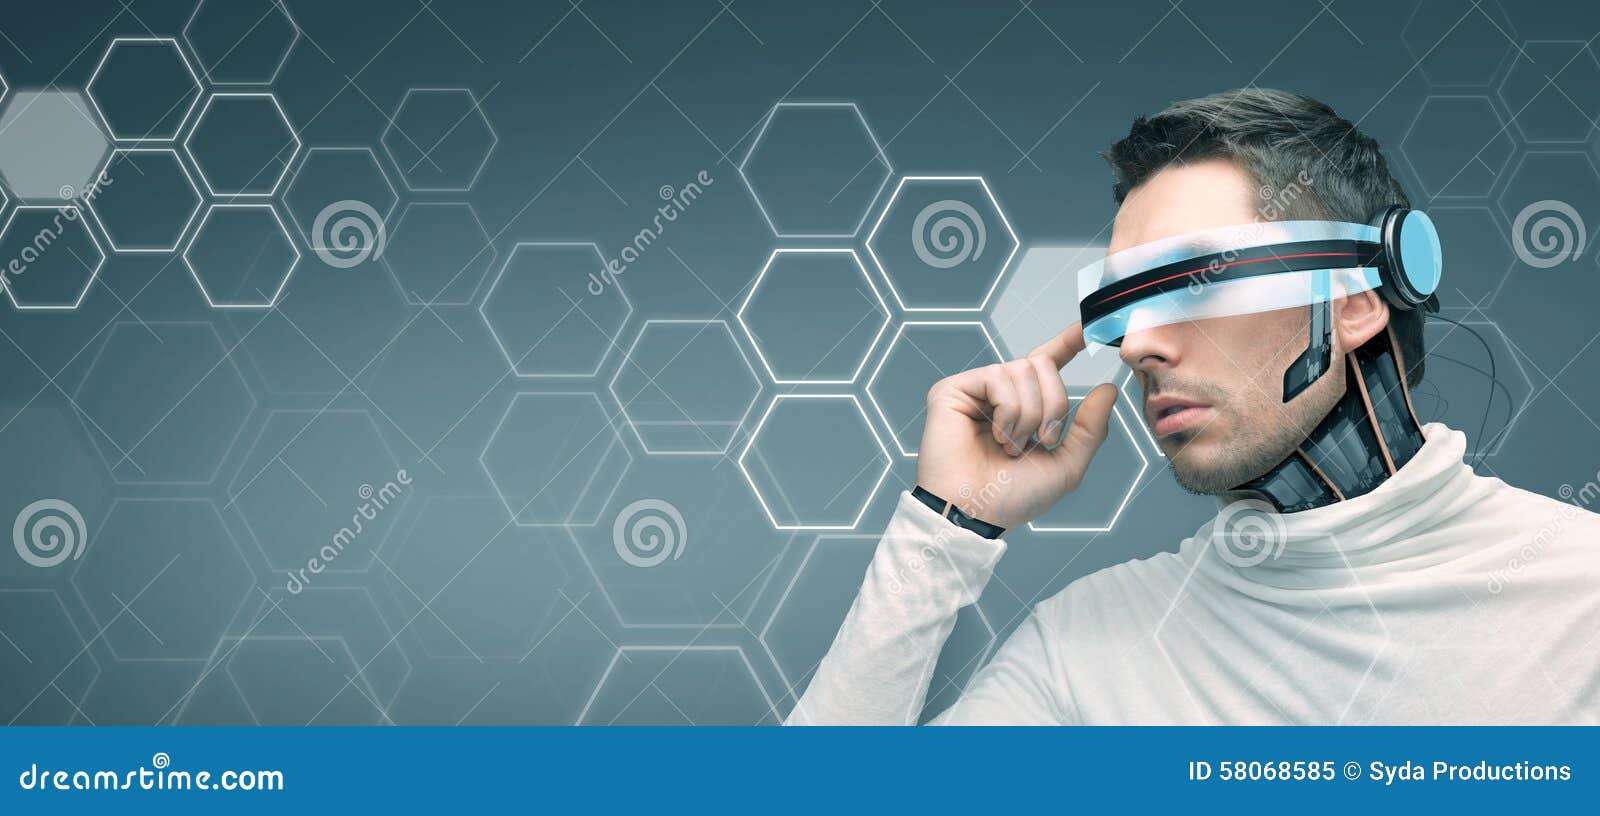 Man With Futuristic 3d Glasses And Sensors Stock Image Image Of Hexagon Equipment 58068585